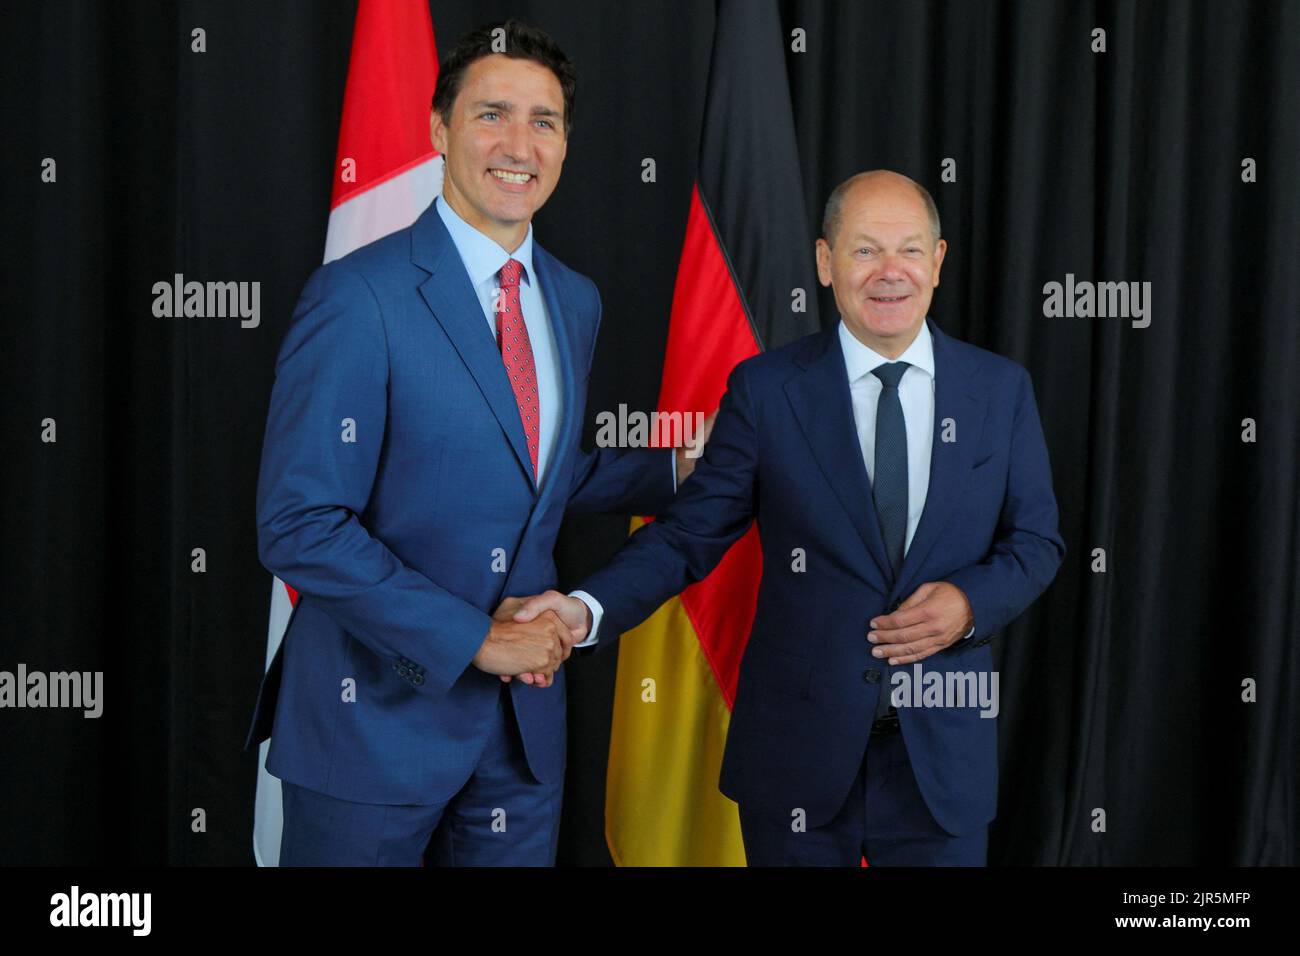 Canada's Prime Minister Justin Trudeau shakes hands with Germany's Chancellor Olaf Scholz during their meeting at the Montreal Science Centre in Montreal, Quebec, Canada August 22, 2022.  REUTERS/Christinne Muschi Stock Photo